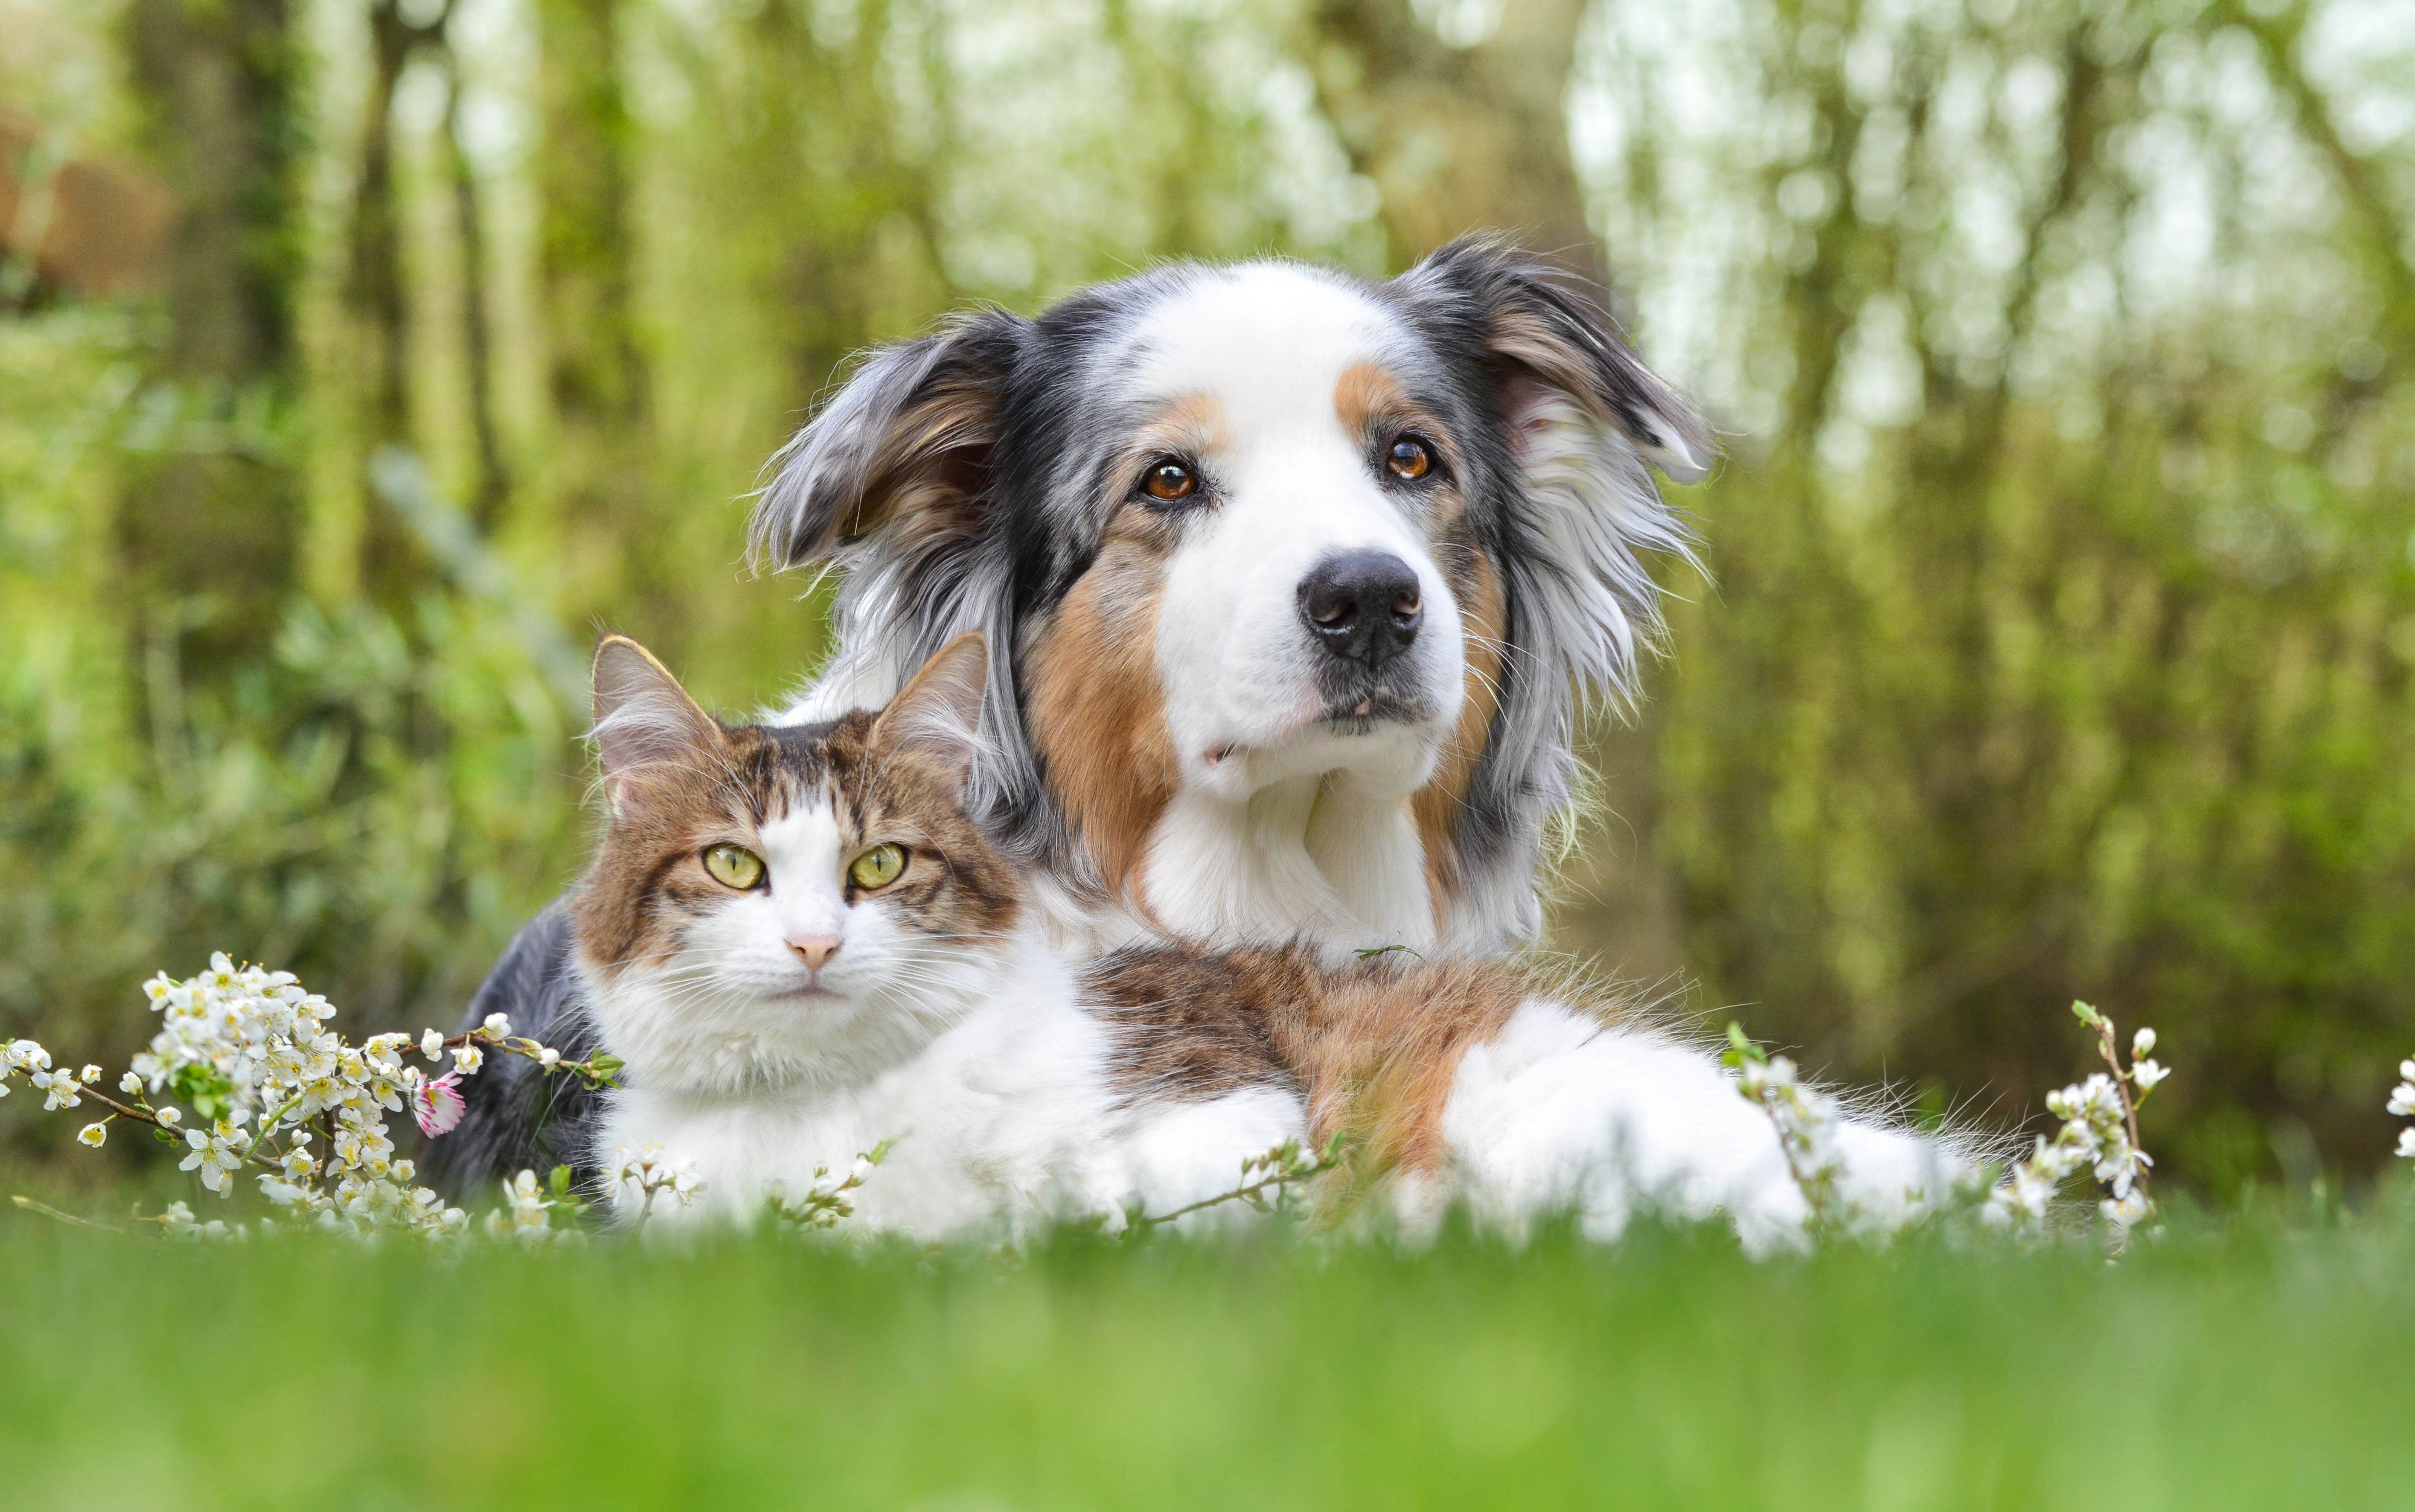 Why Stay Current on Your Pets’ Vaccinations